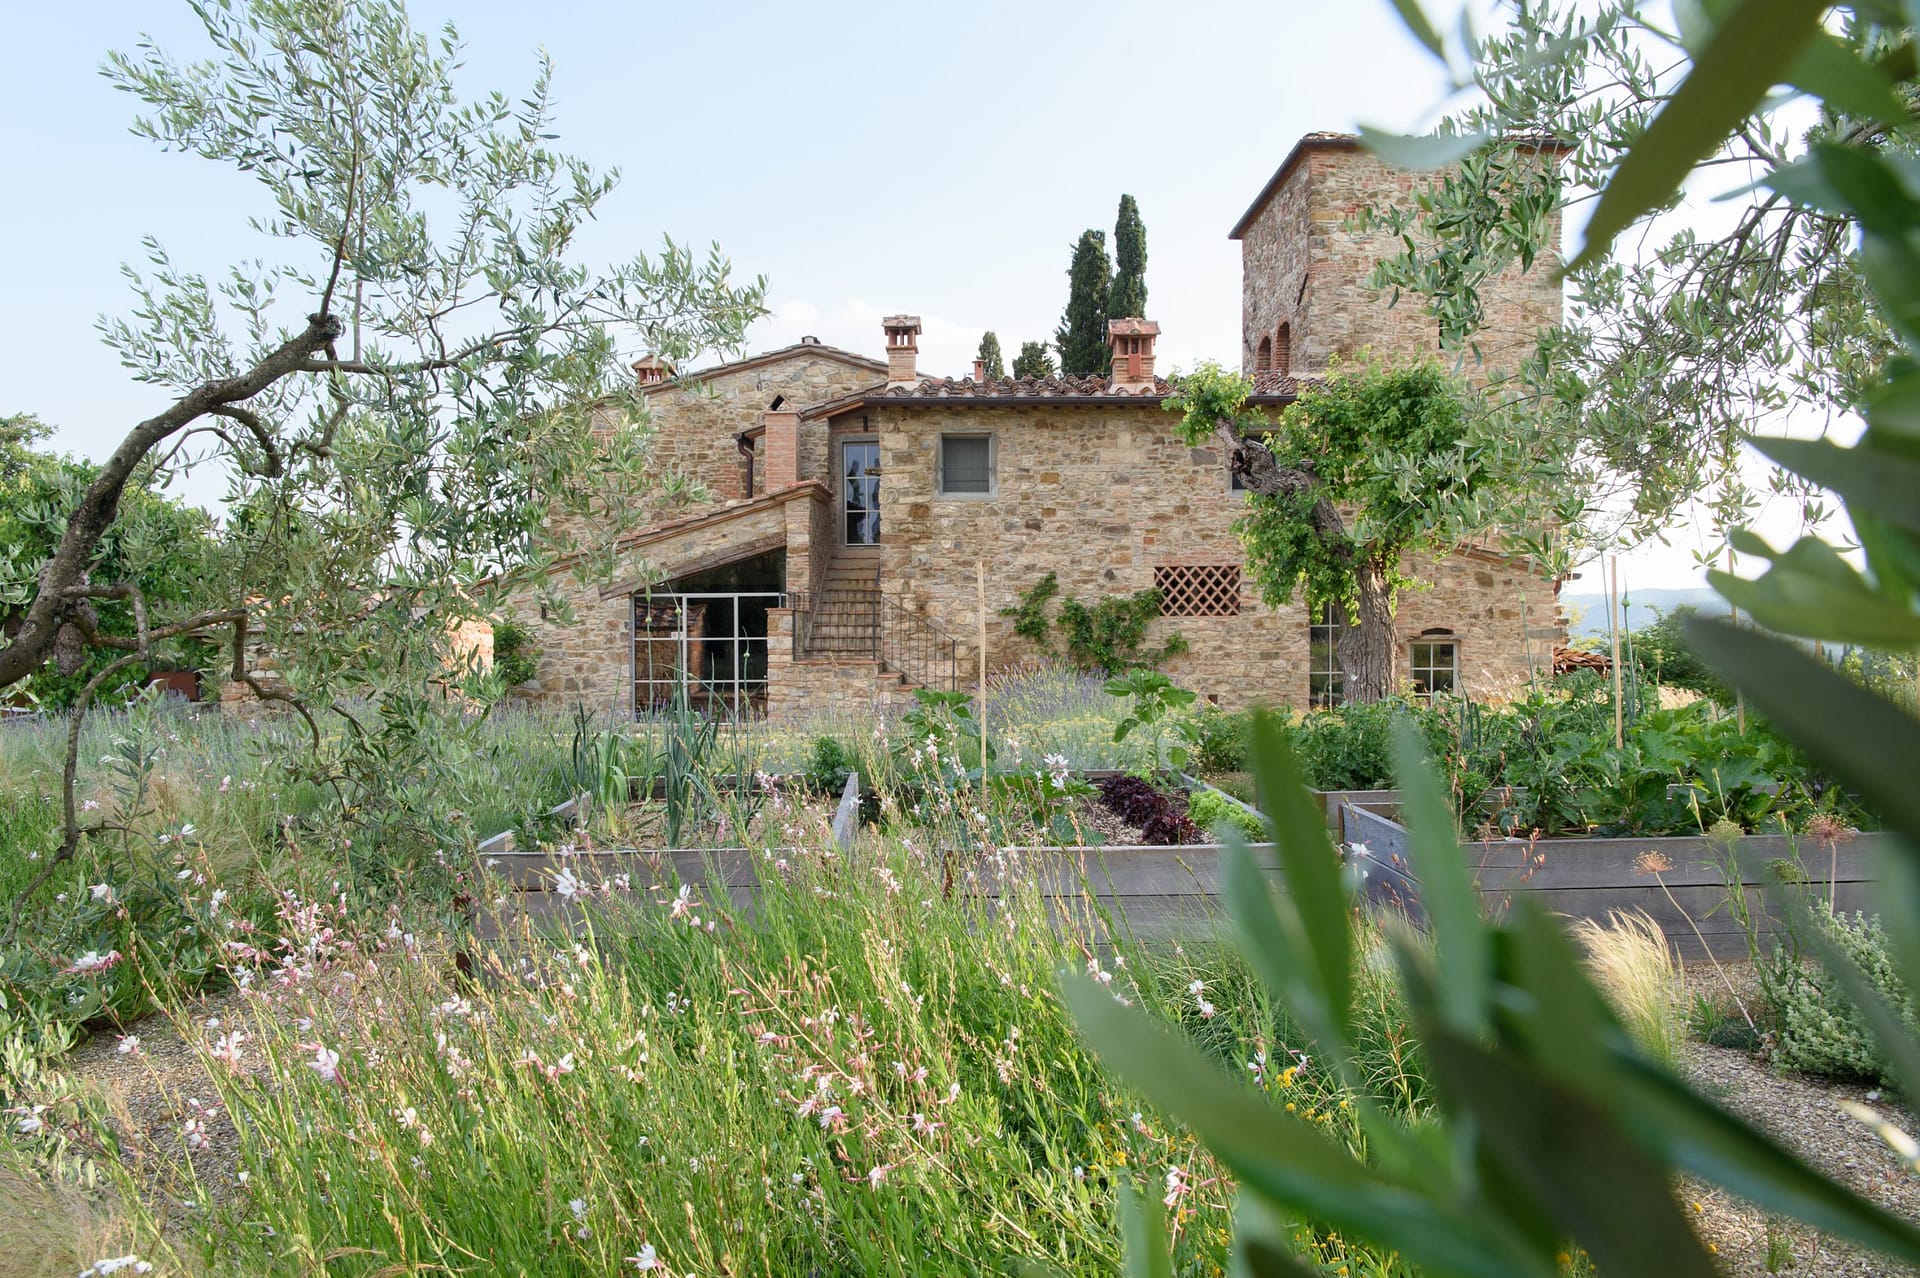 Luxury villa for rent in Tuscany Italy